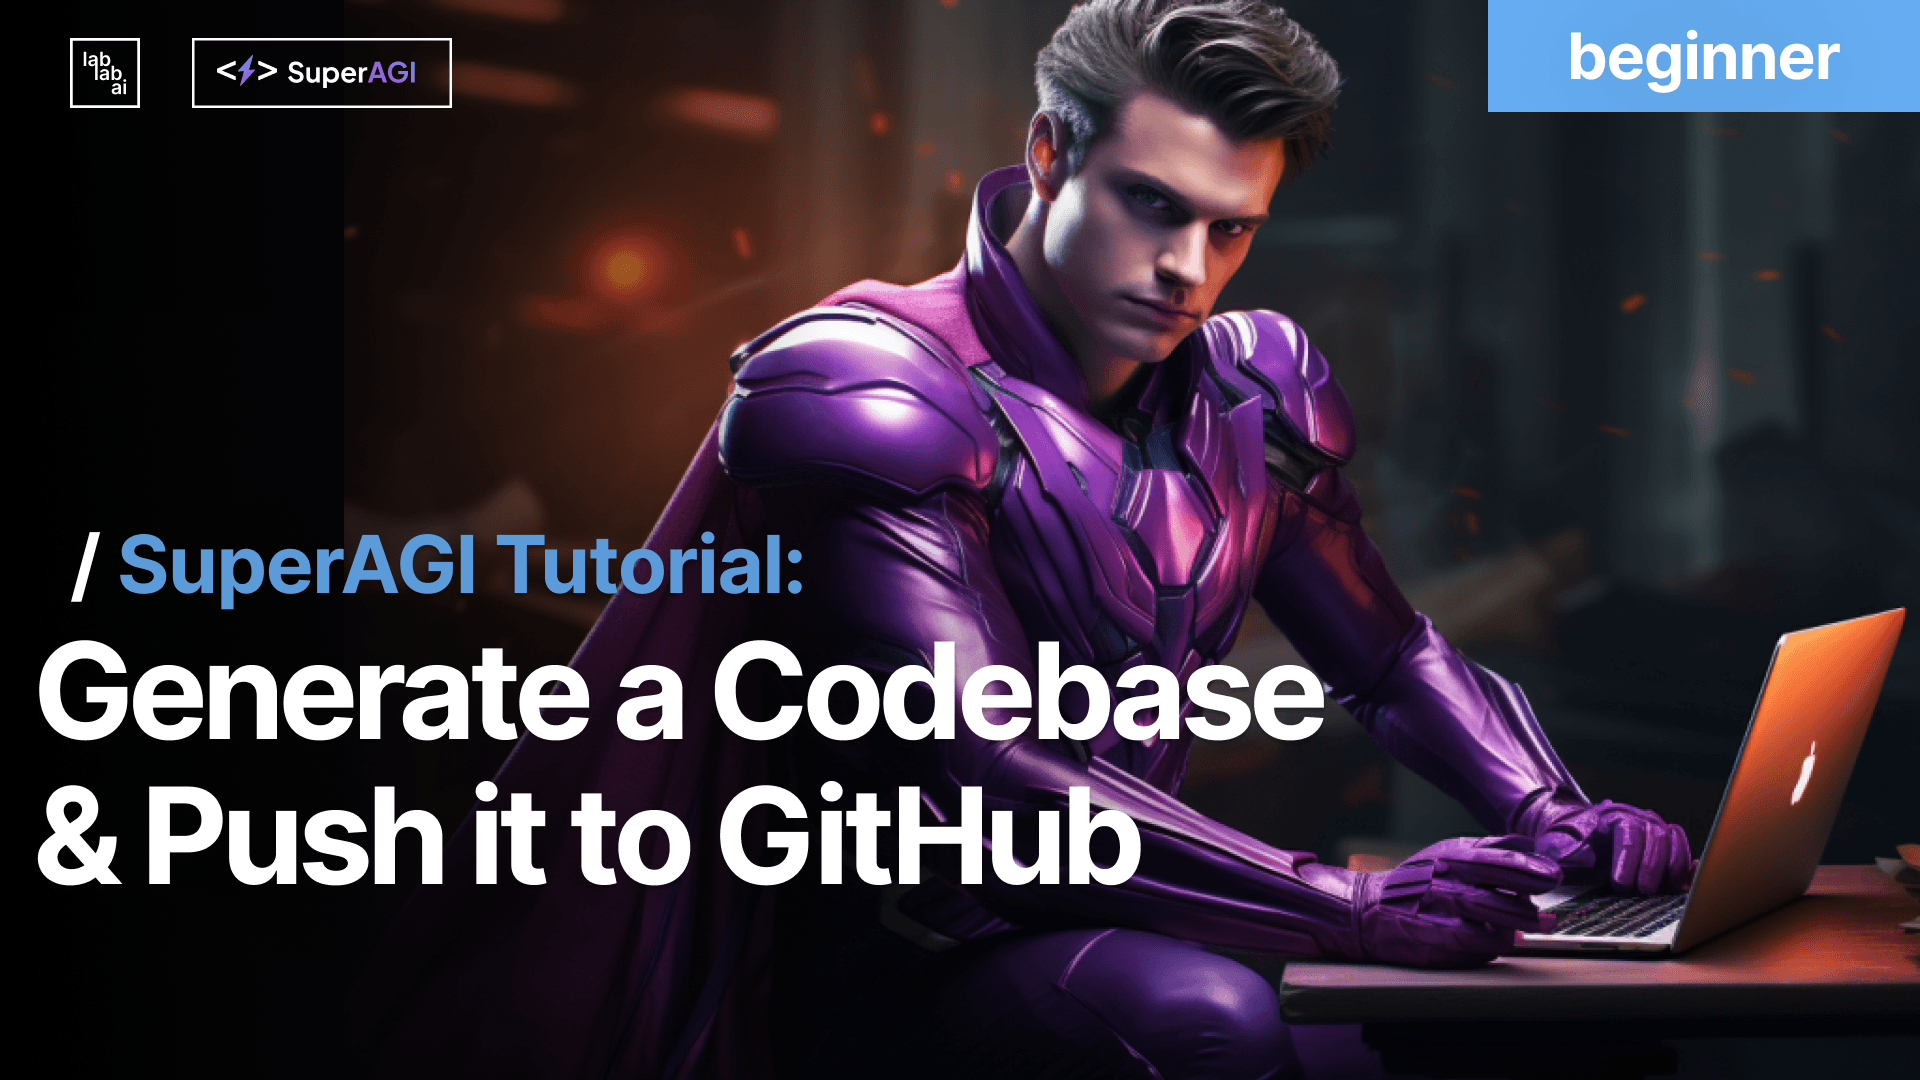 SuperAGI tutorial: Generate a Codebase and Push it to GitHub